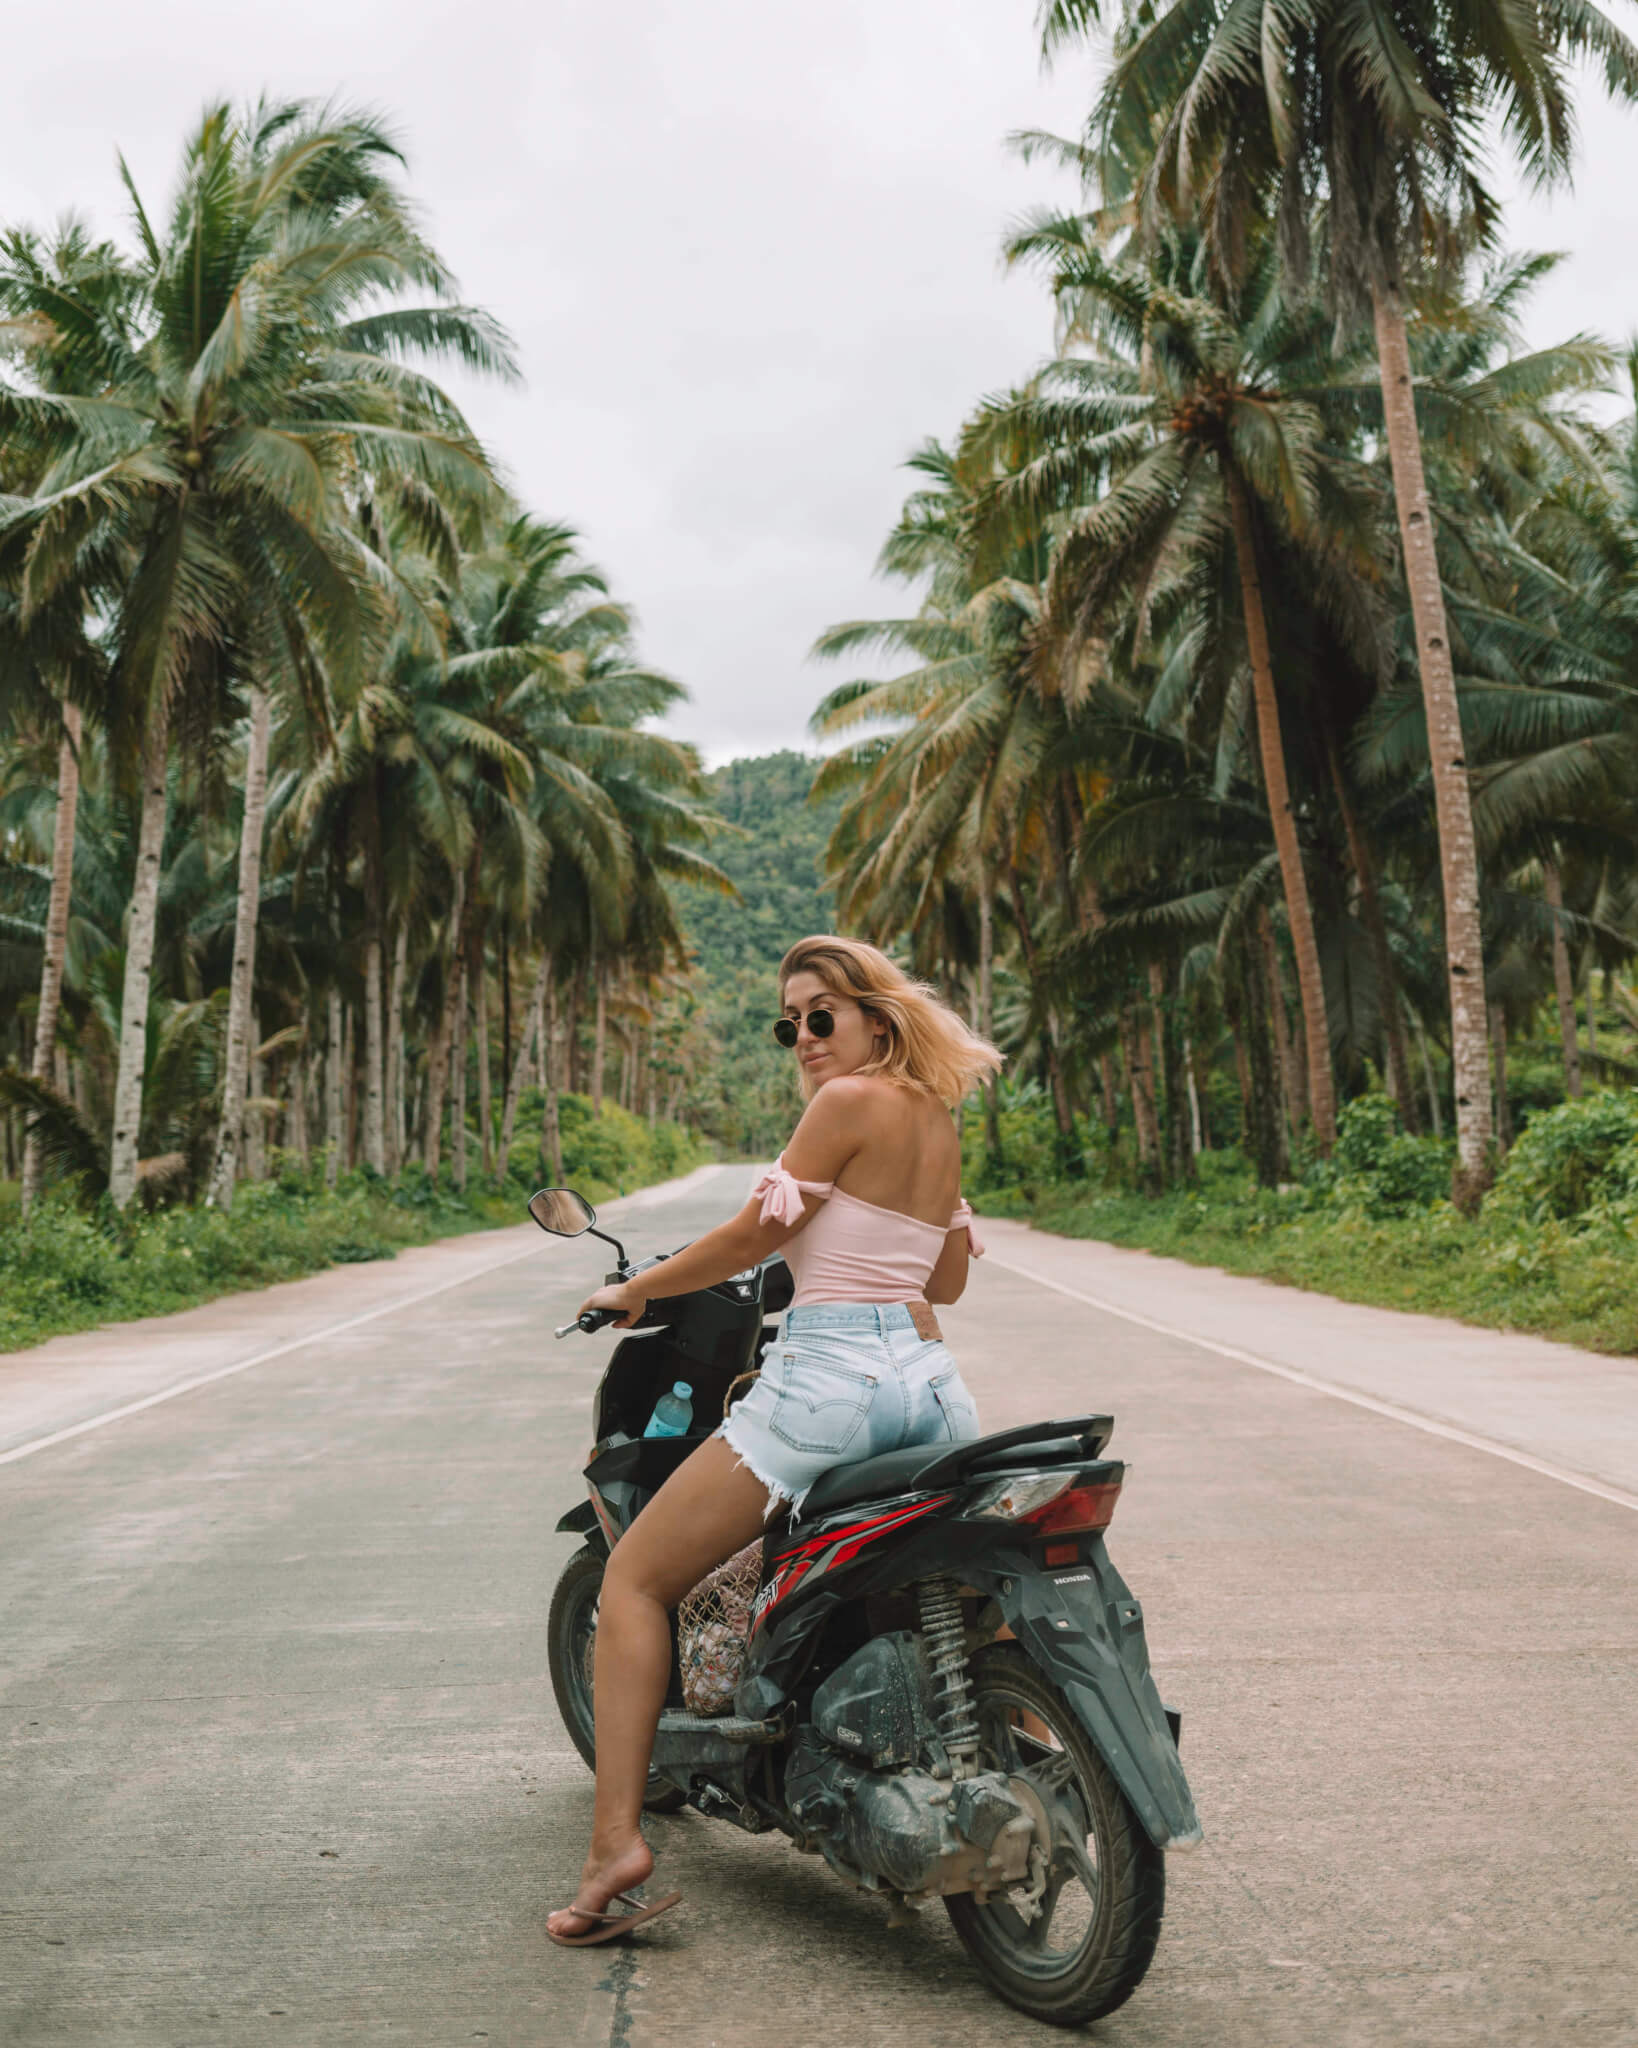 Scooter riding In Siargao